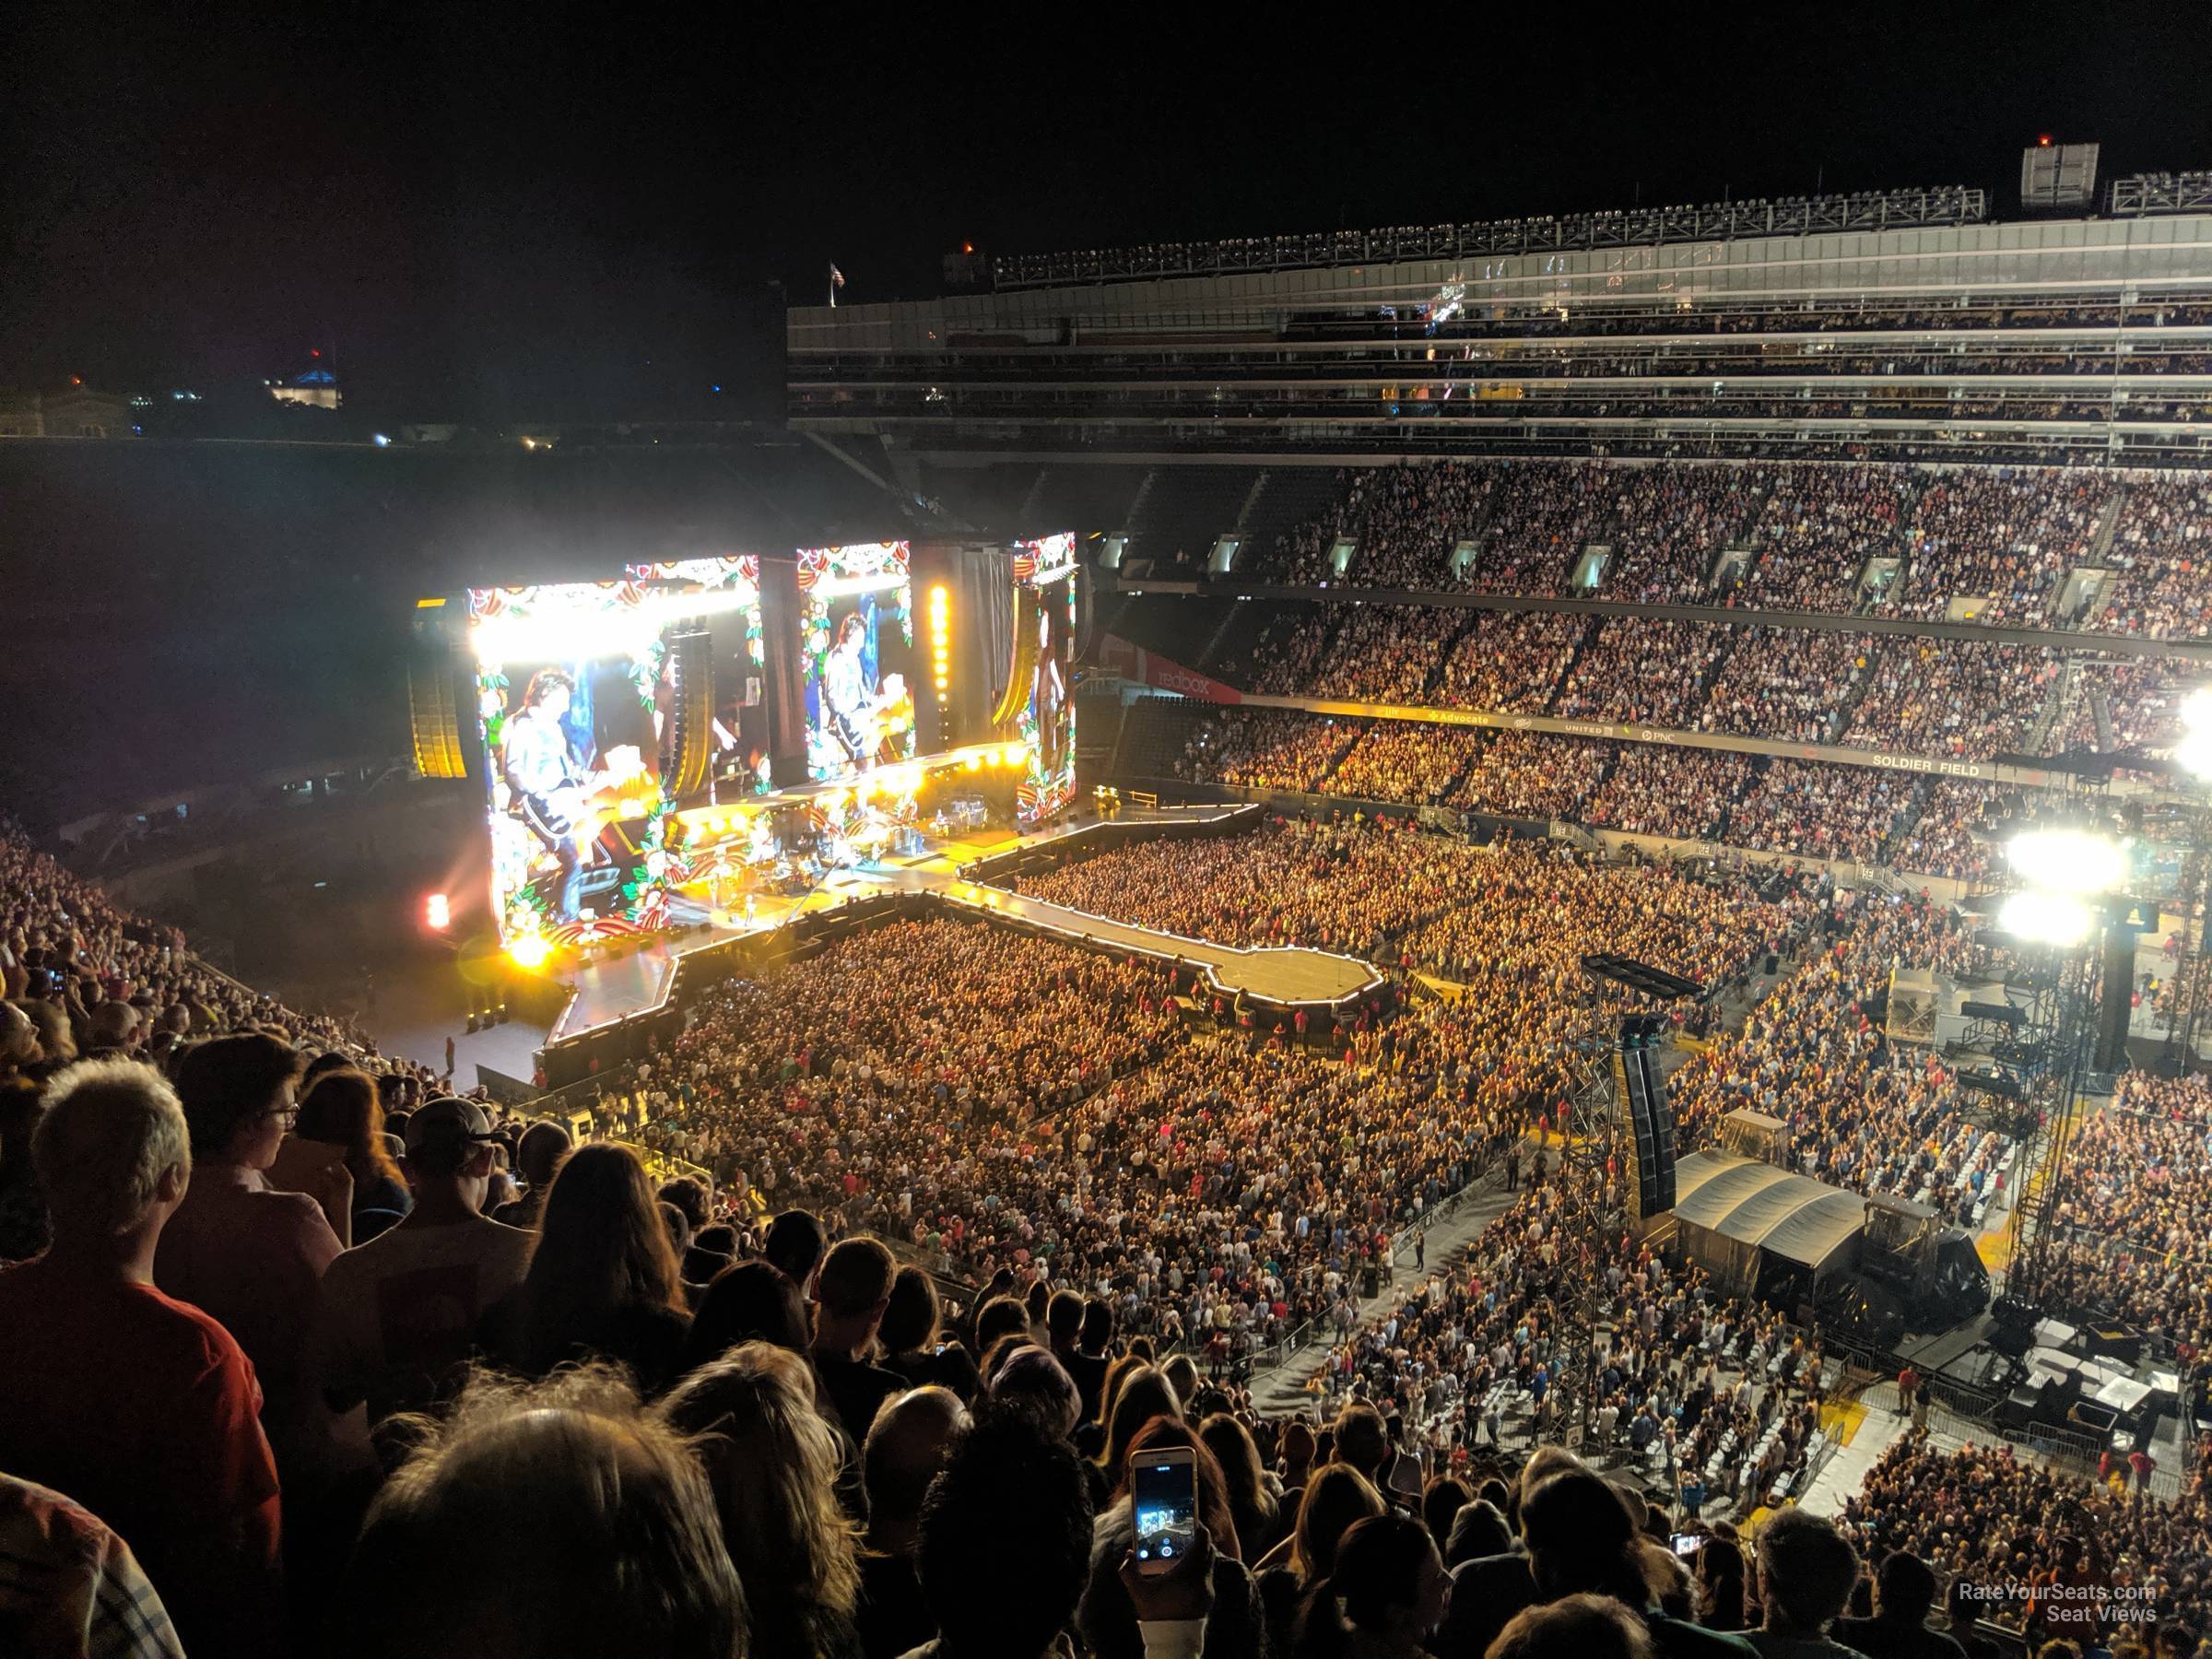 section 434, row 16 seat view  for concert - soldier field